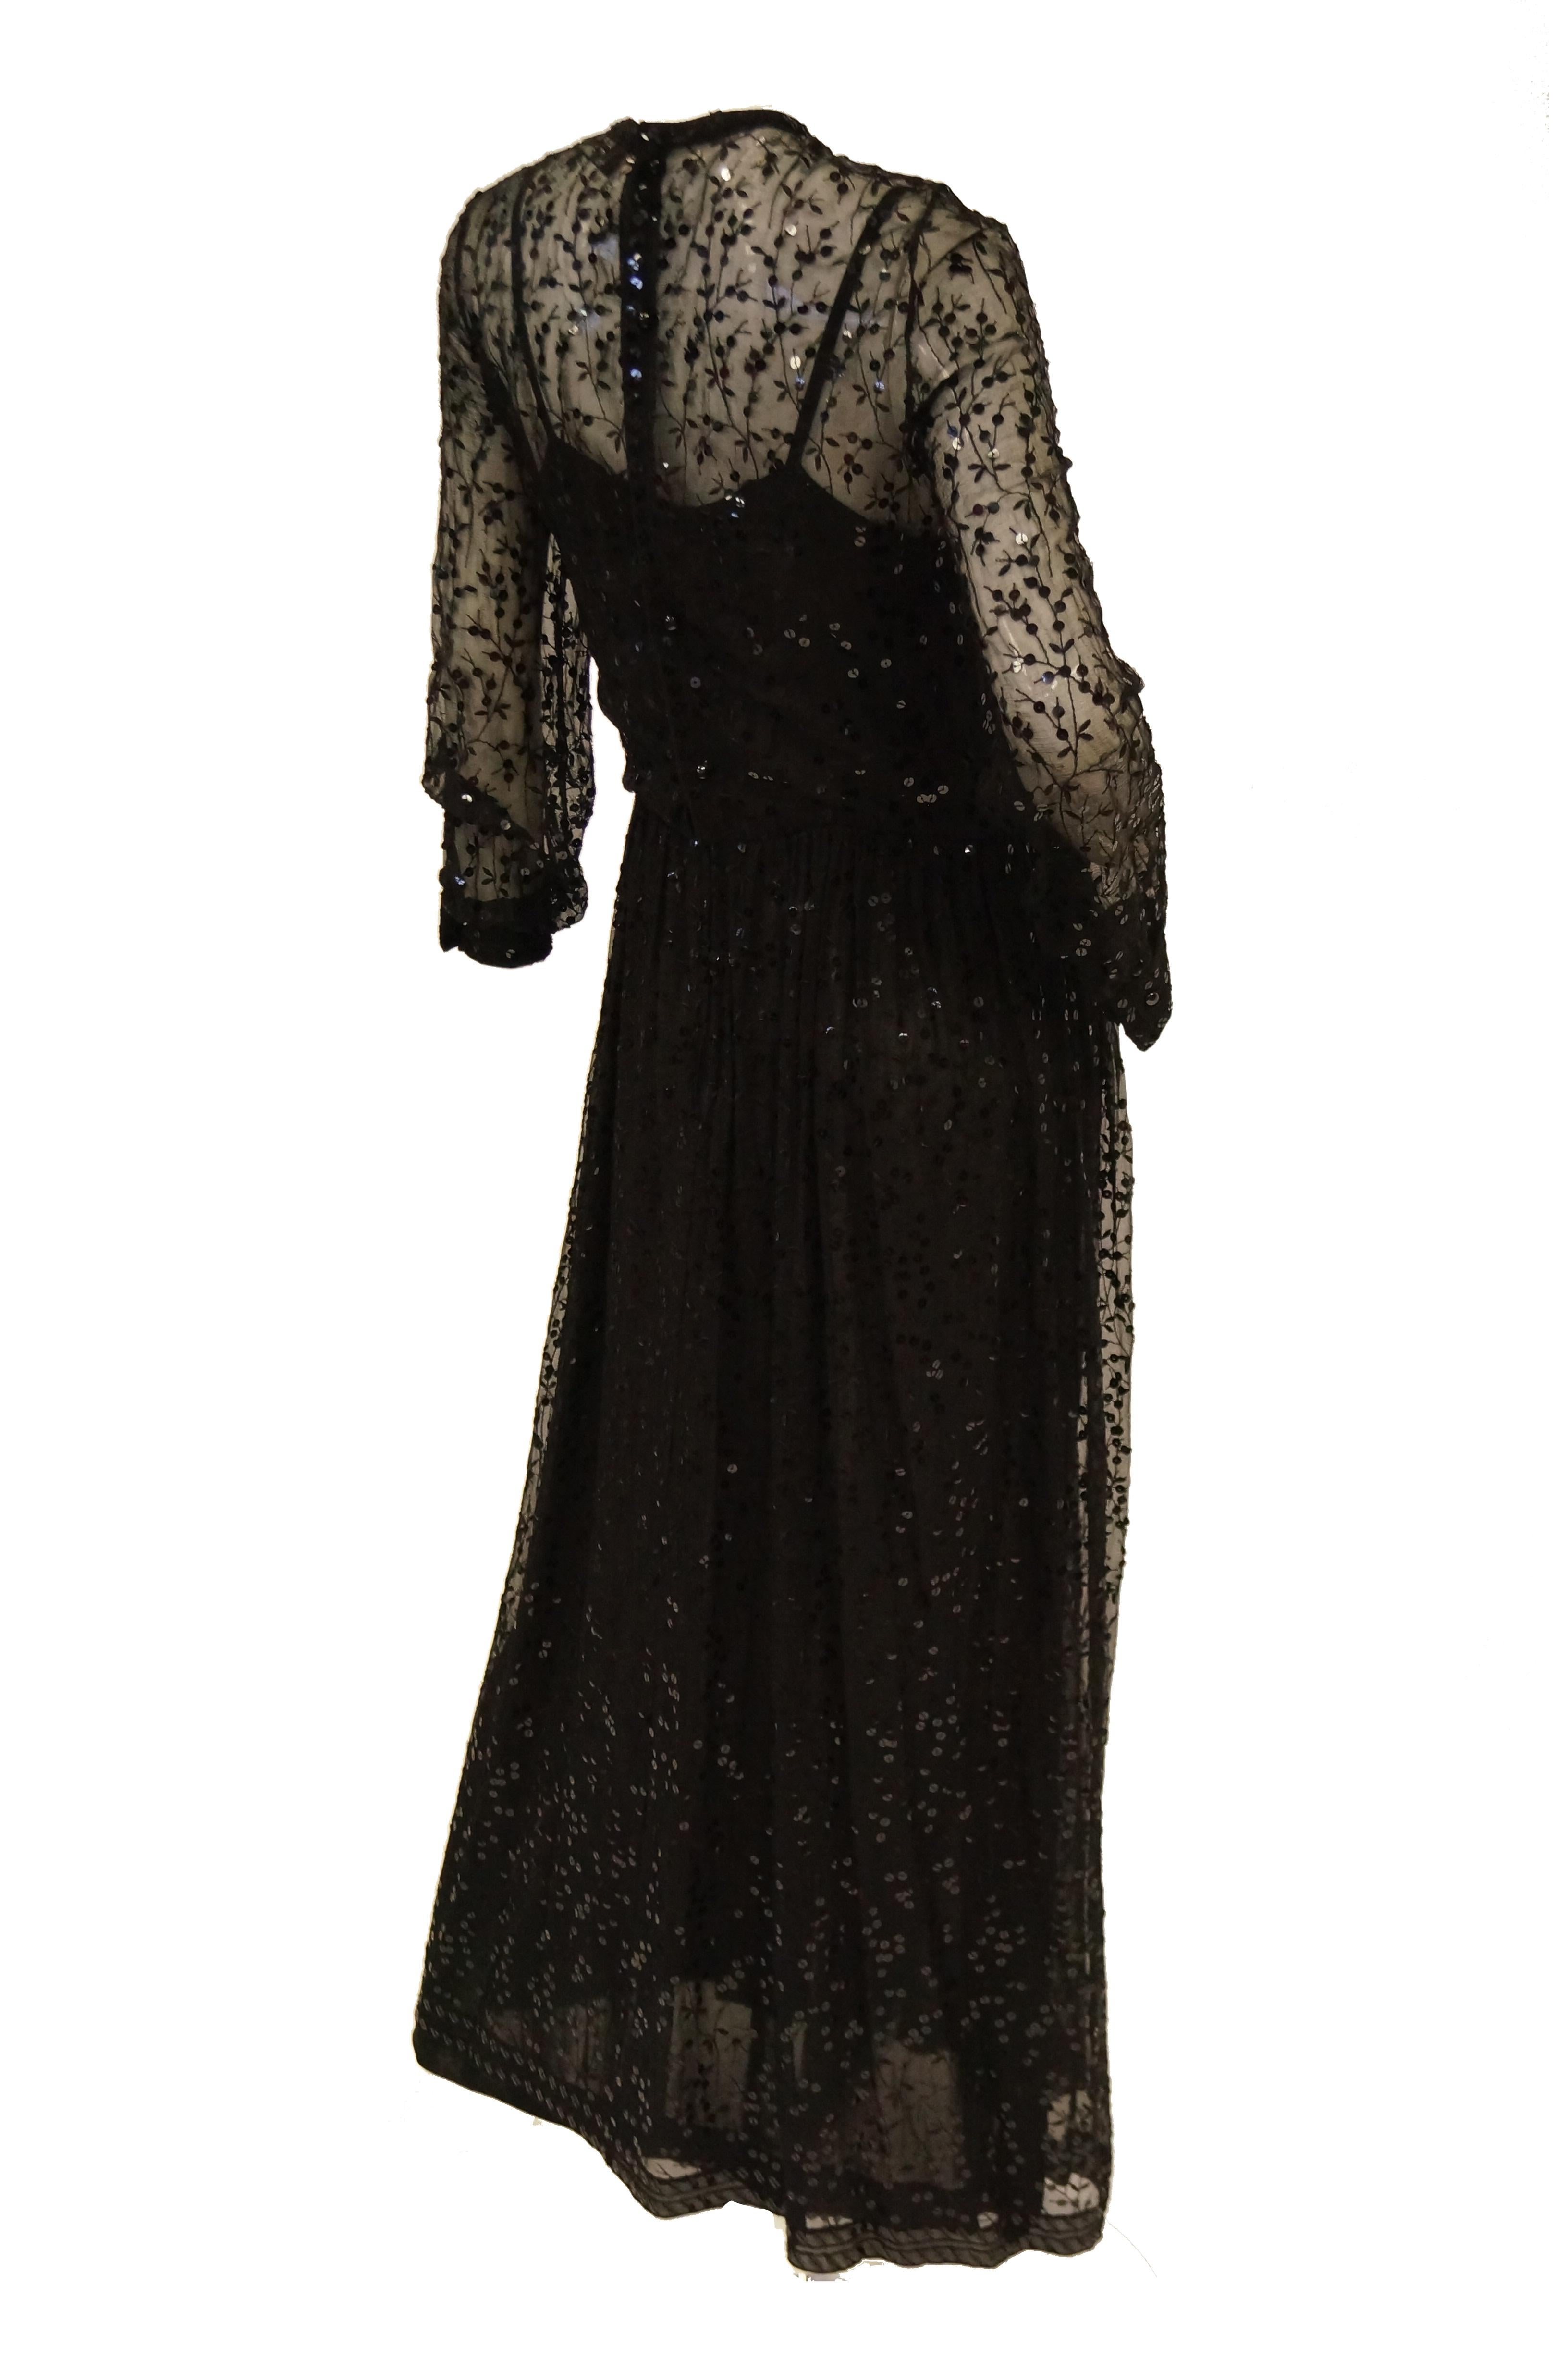 1980s Chanel Sheer Black Silk Evening Dress with Floral Embroidery and Sequins 1